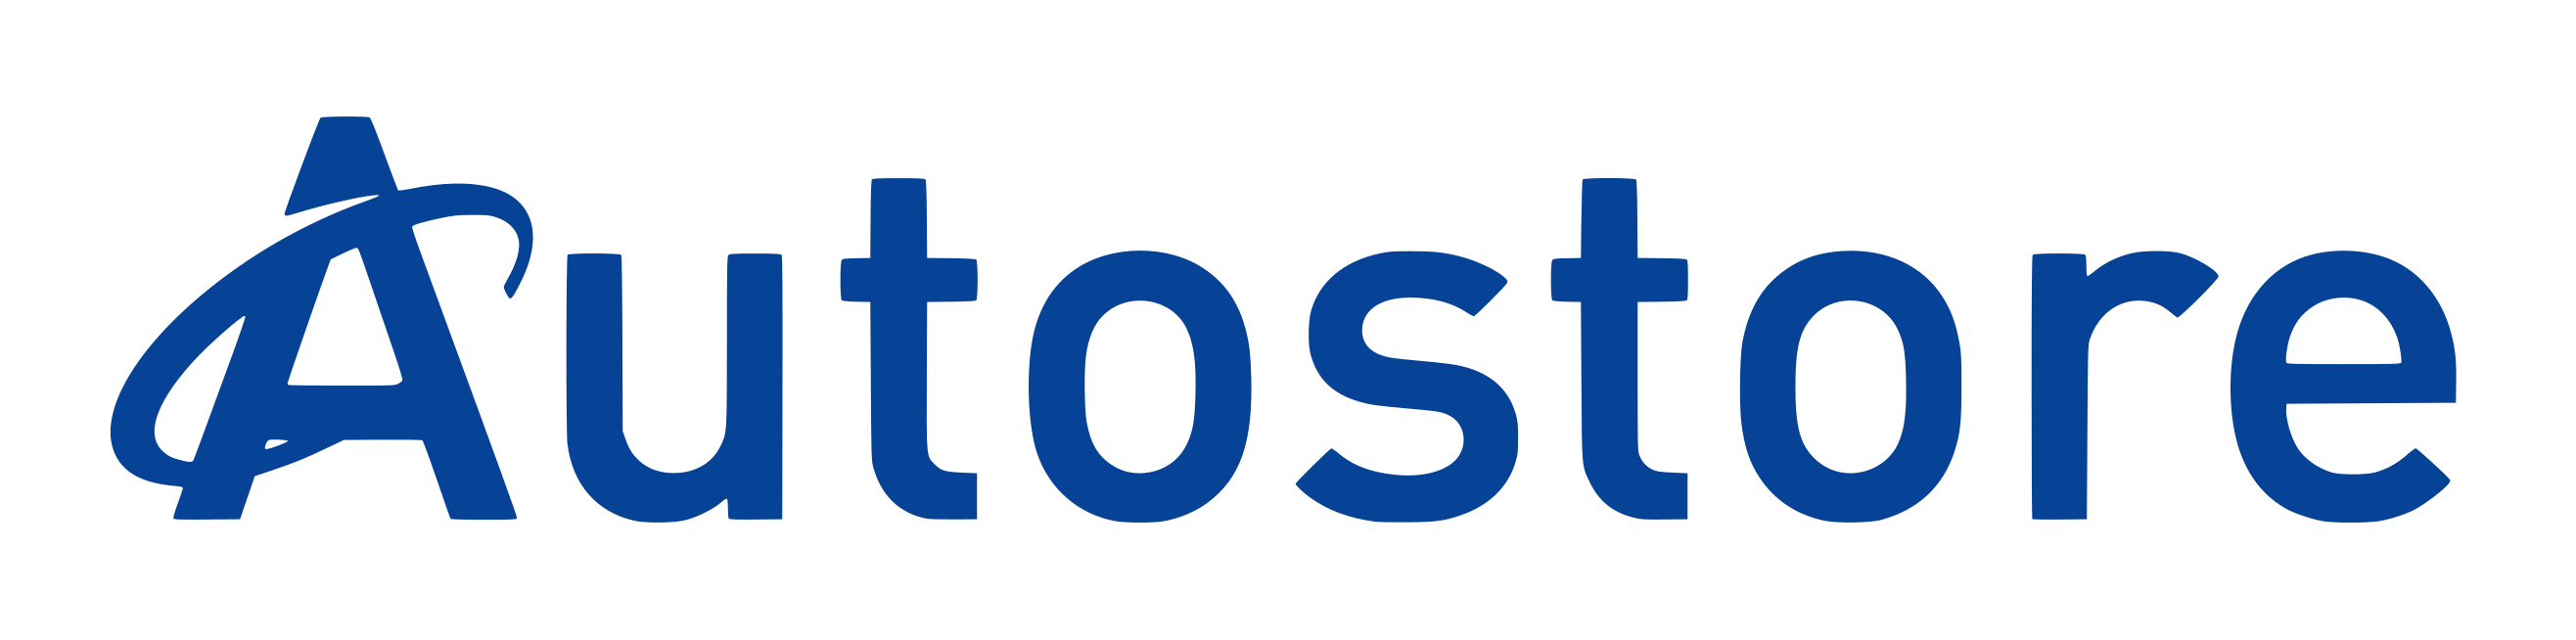 AutoStore Logo - TBA - Operational software for ports, terminals and warehouses | TBA ...